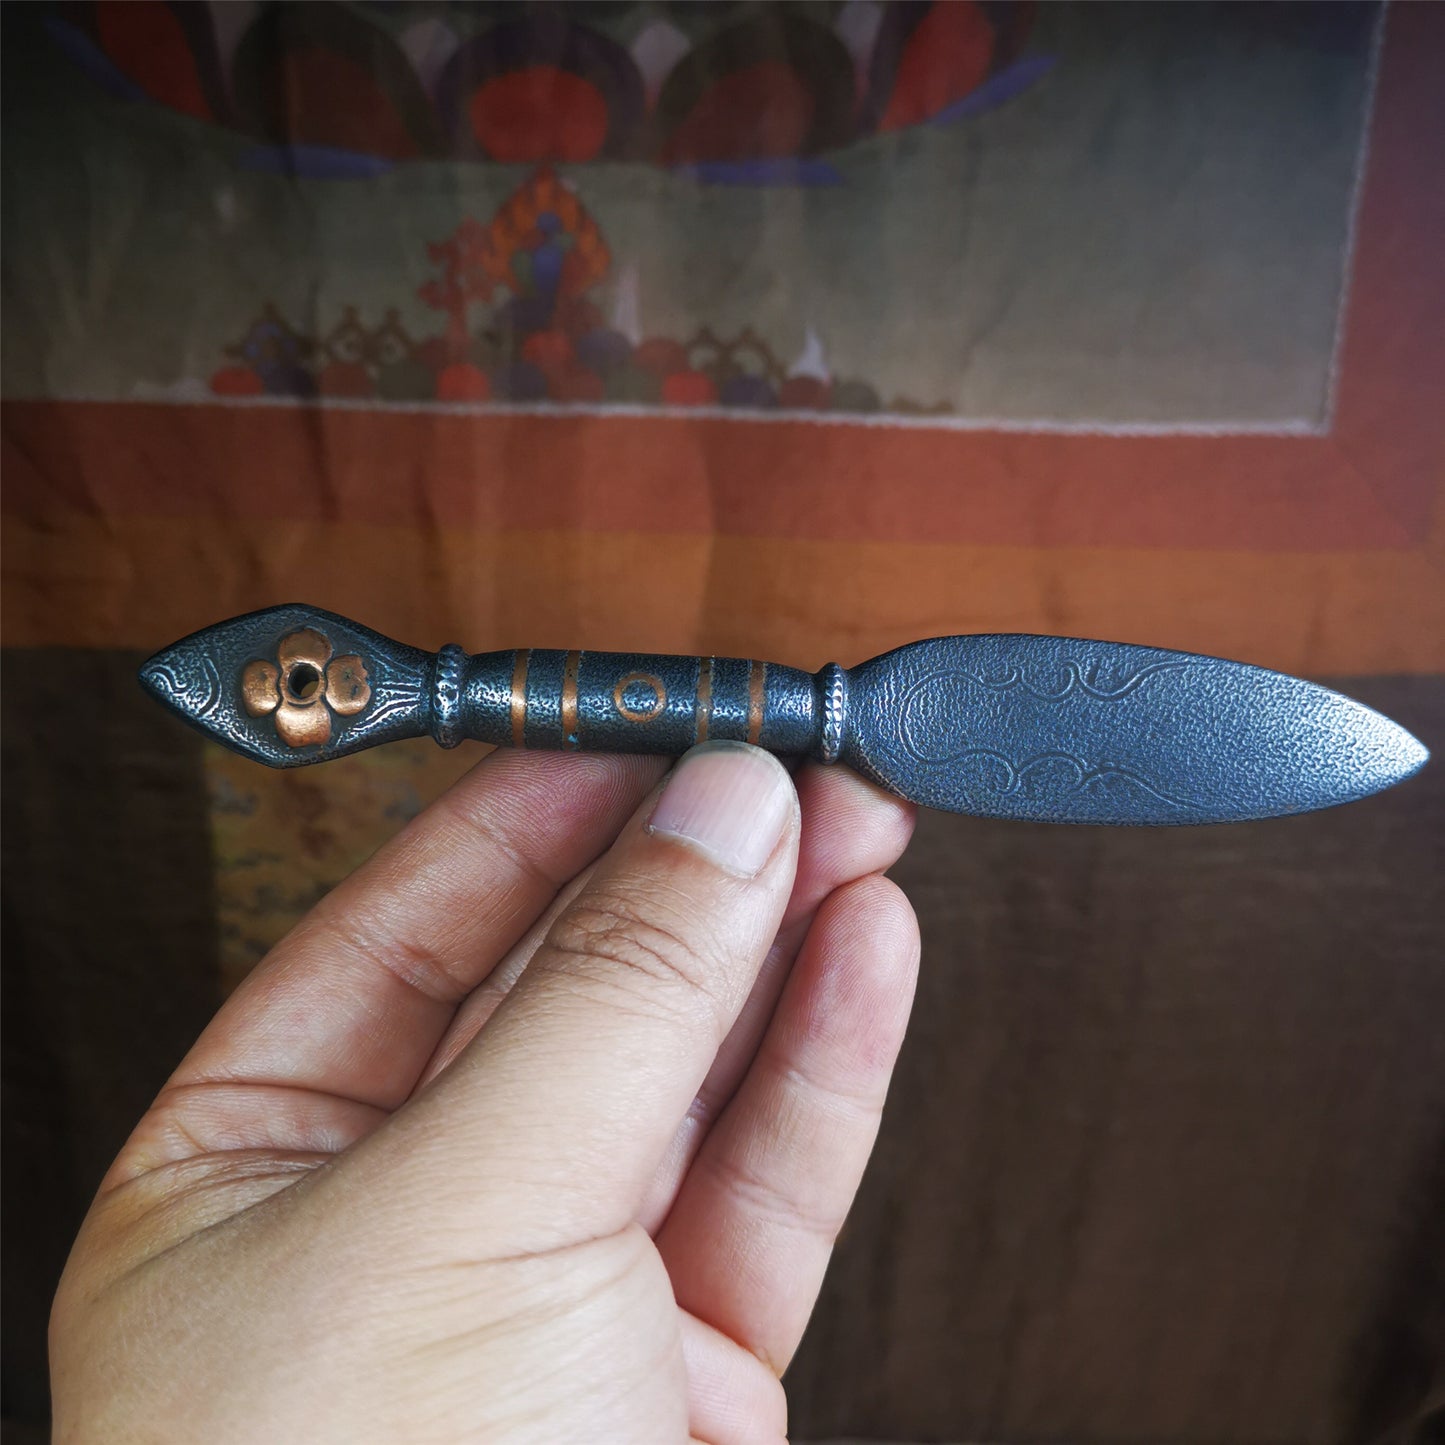 This kila / phurba was handmade by Tibetan craftsmen from Tibet in 2000s.  It's a kila dagger,made of cold iron, carved cloud pattern, inlaid red copper, made into a dzi pattern on handle, and the petals of the tail hanging ring